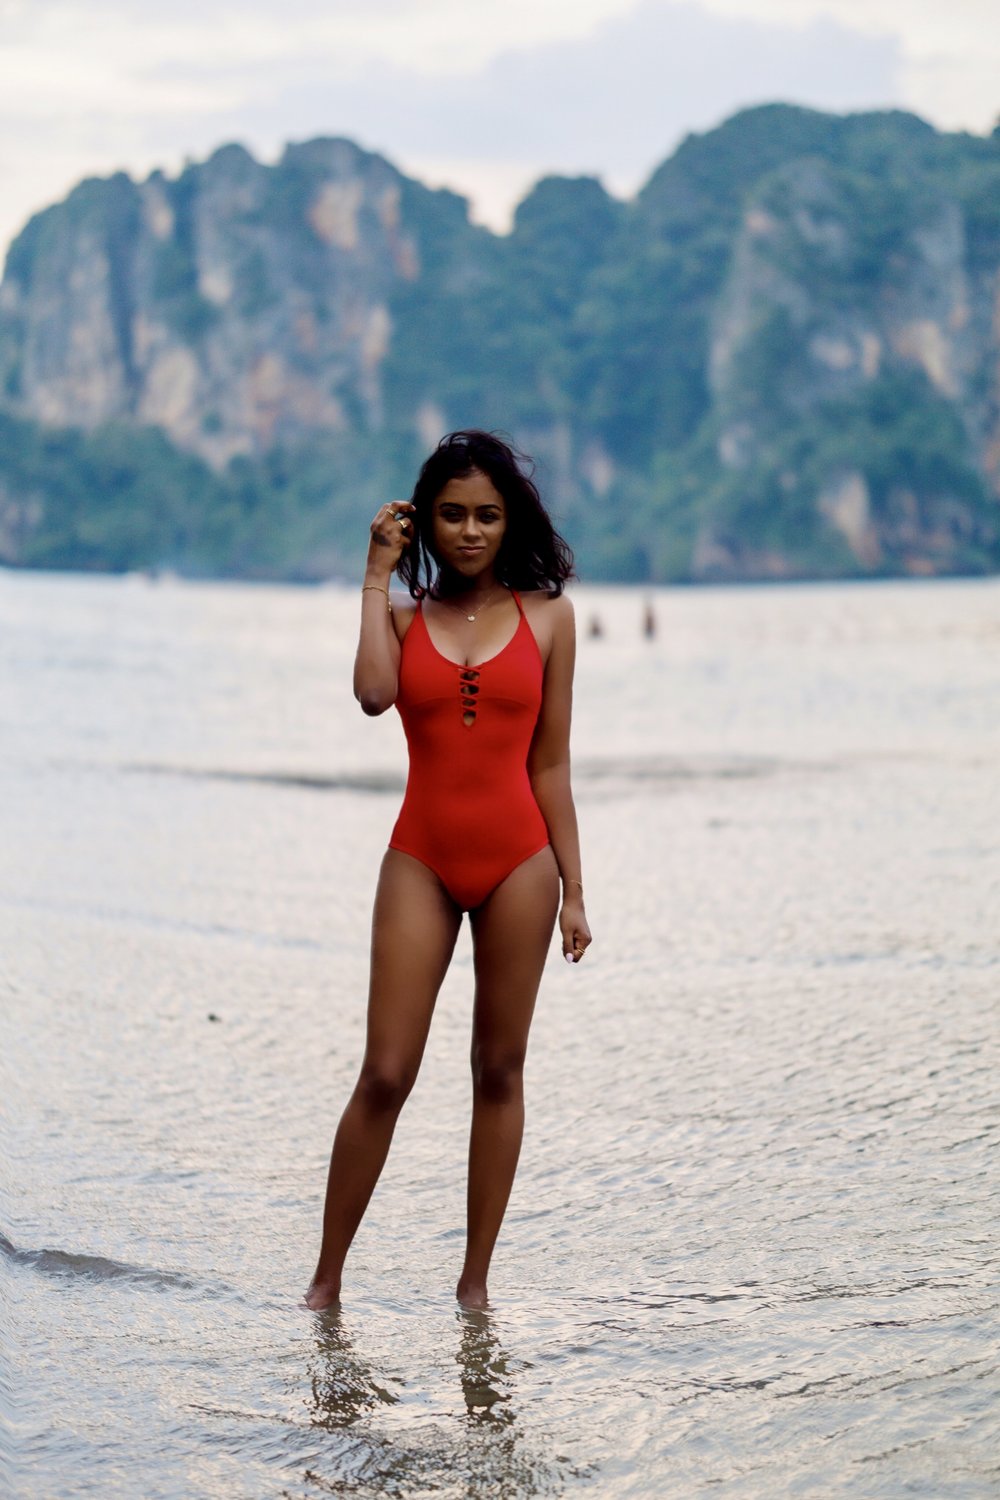 Sachini wearing a red swimsuit on a beach